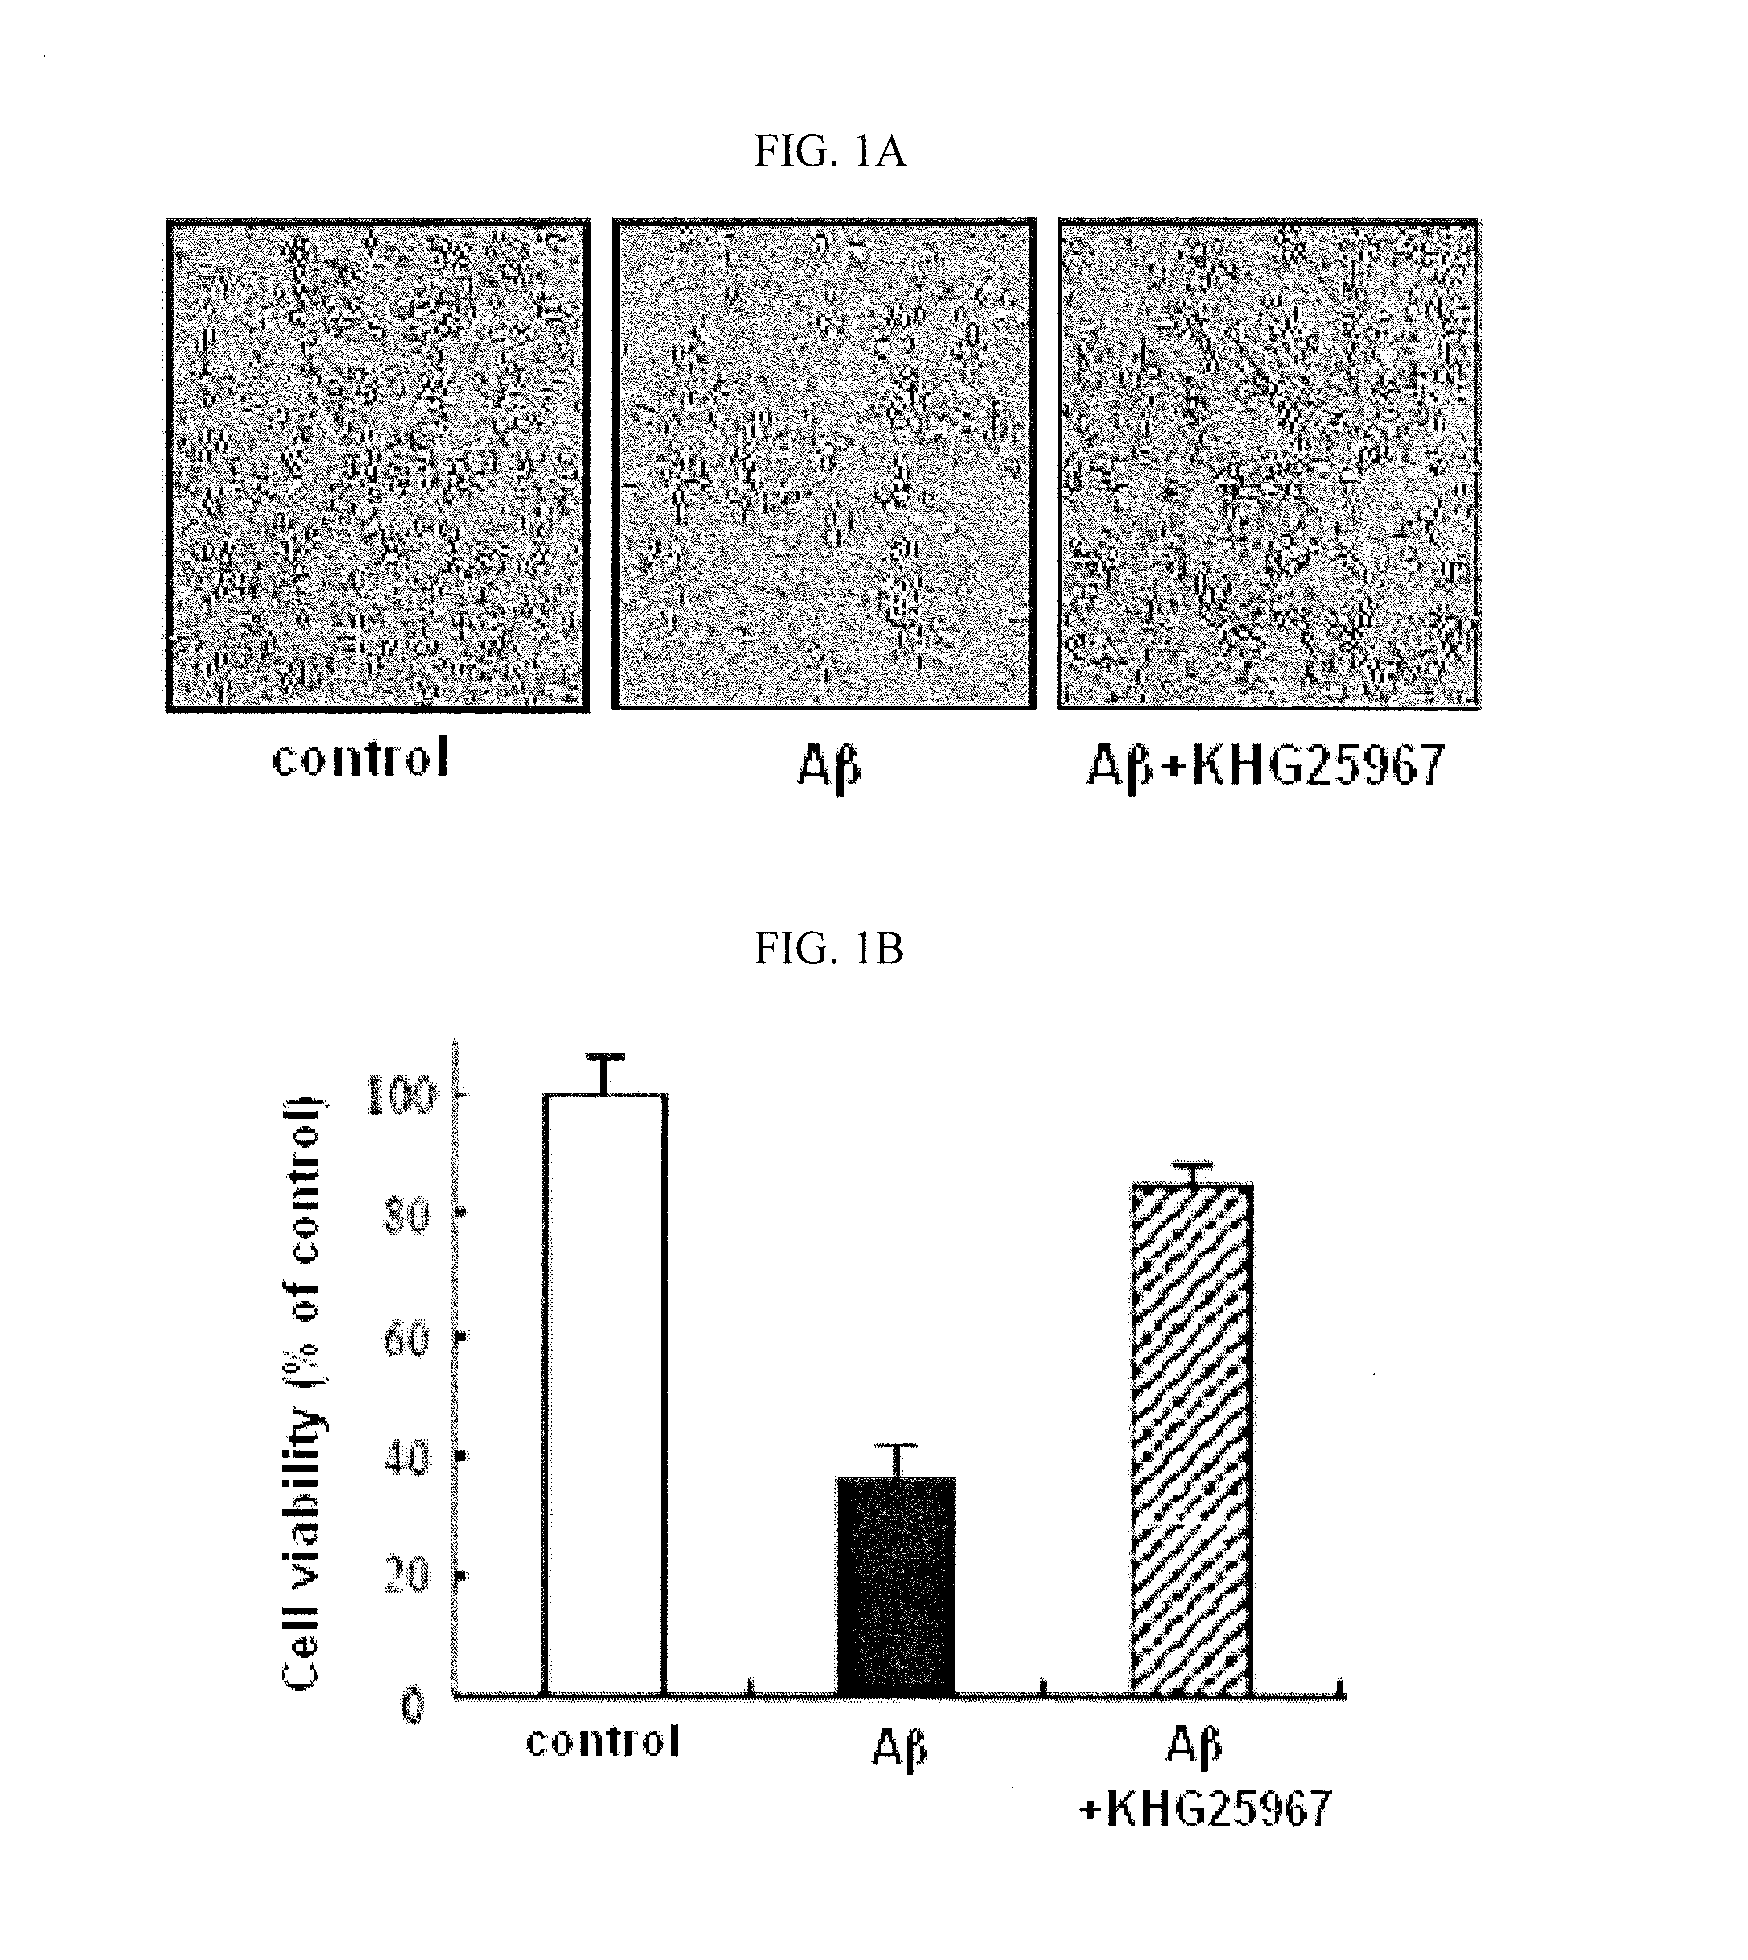 Benzoarylureido compounds, and composition for prevention or treatment of neurodegenerative brain disease containing the same